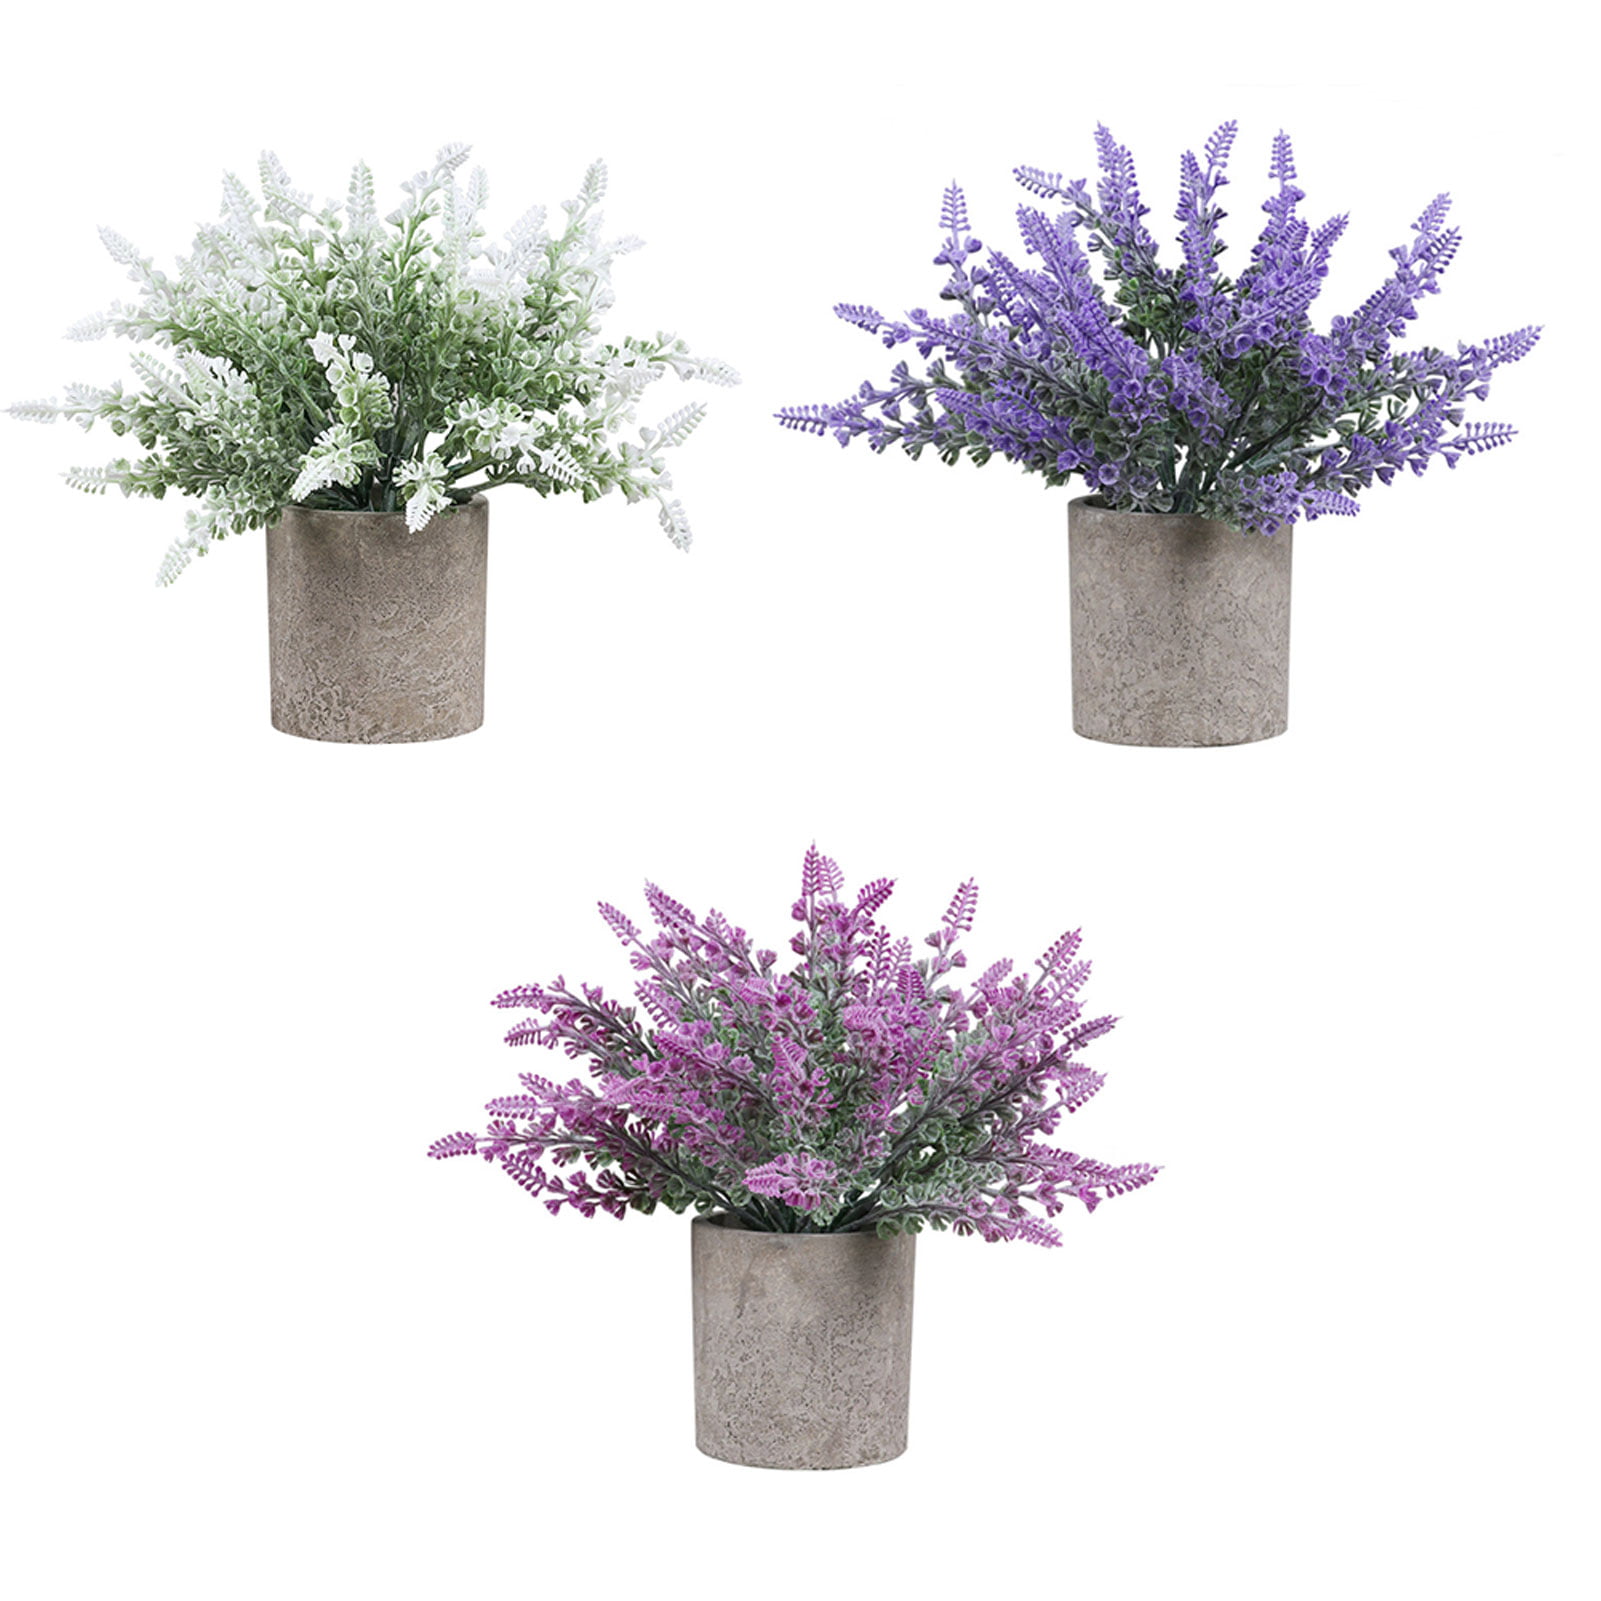 MyGift 7.5 Inch Tall Artificial Lavender Plant with Ceramic Pot Faux Flower Decor Set of 3 